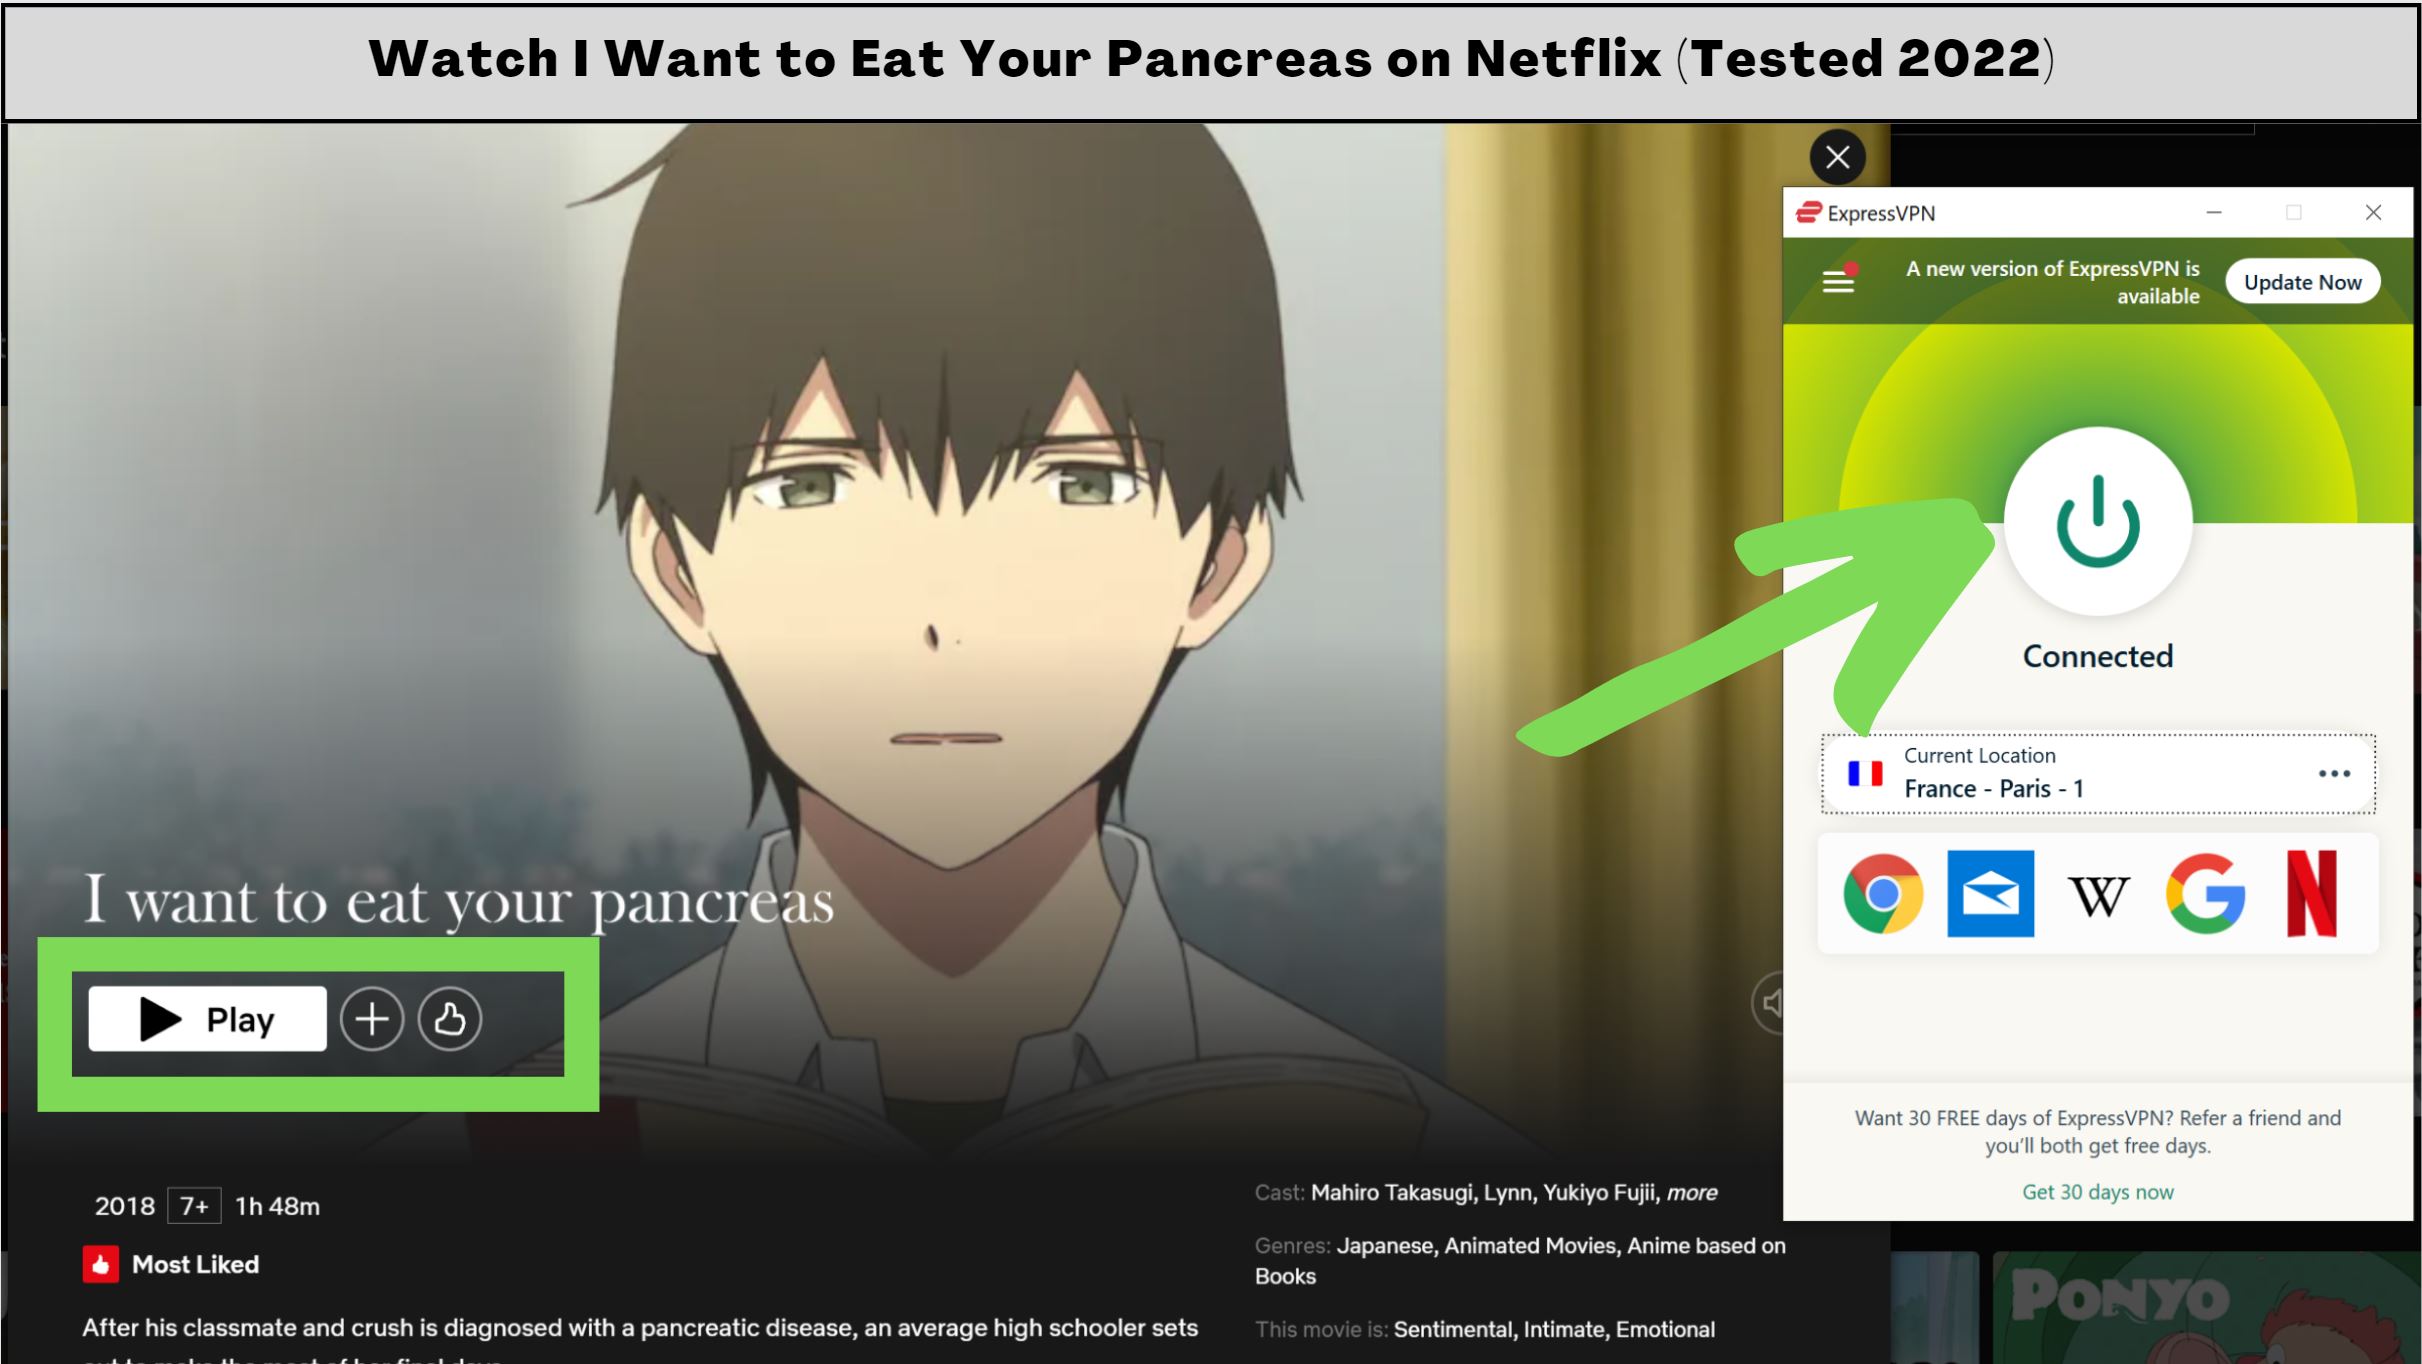 I Want to Eat Your Pancreas on Netflix